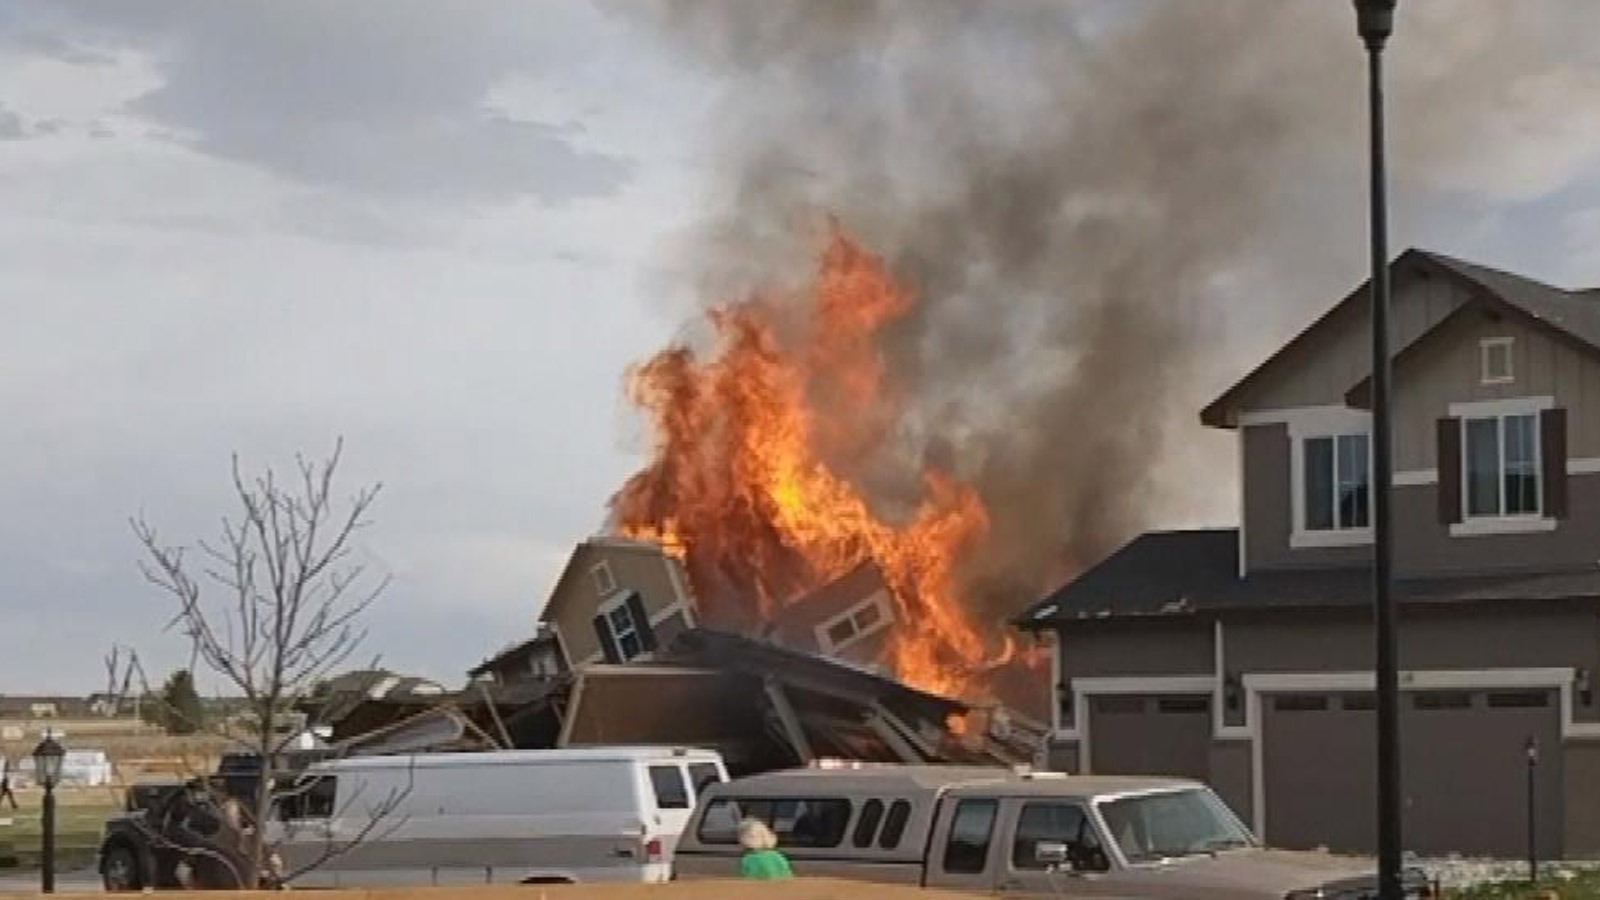 Colorado Considers New Pipeline Rules After Deadly Home Explosion In Firestone